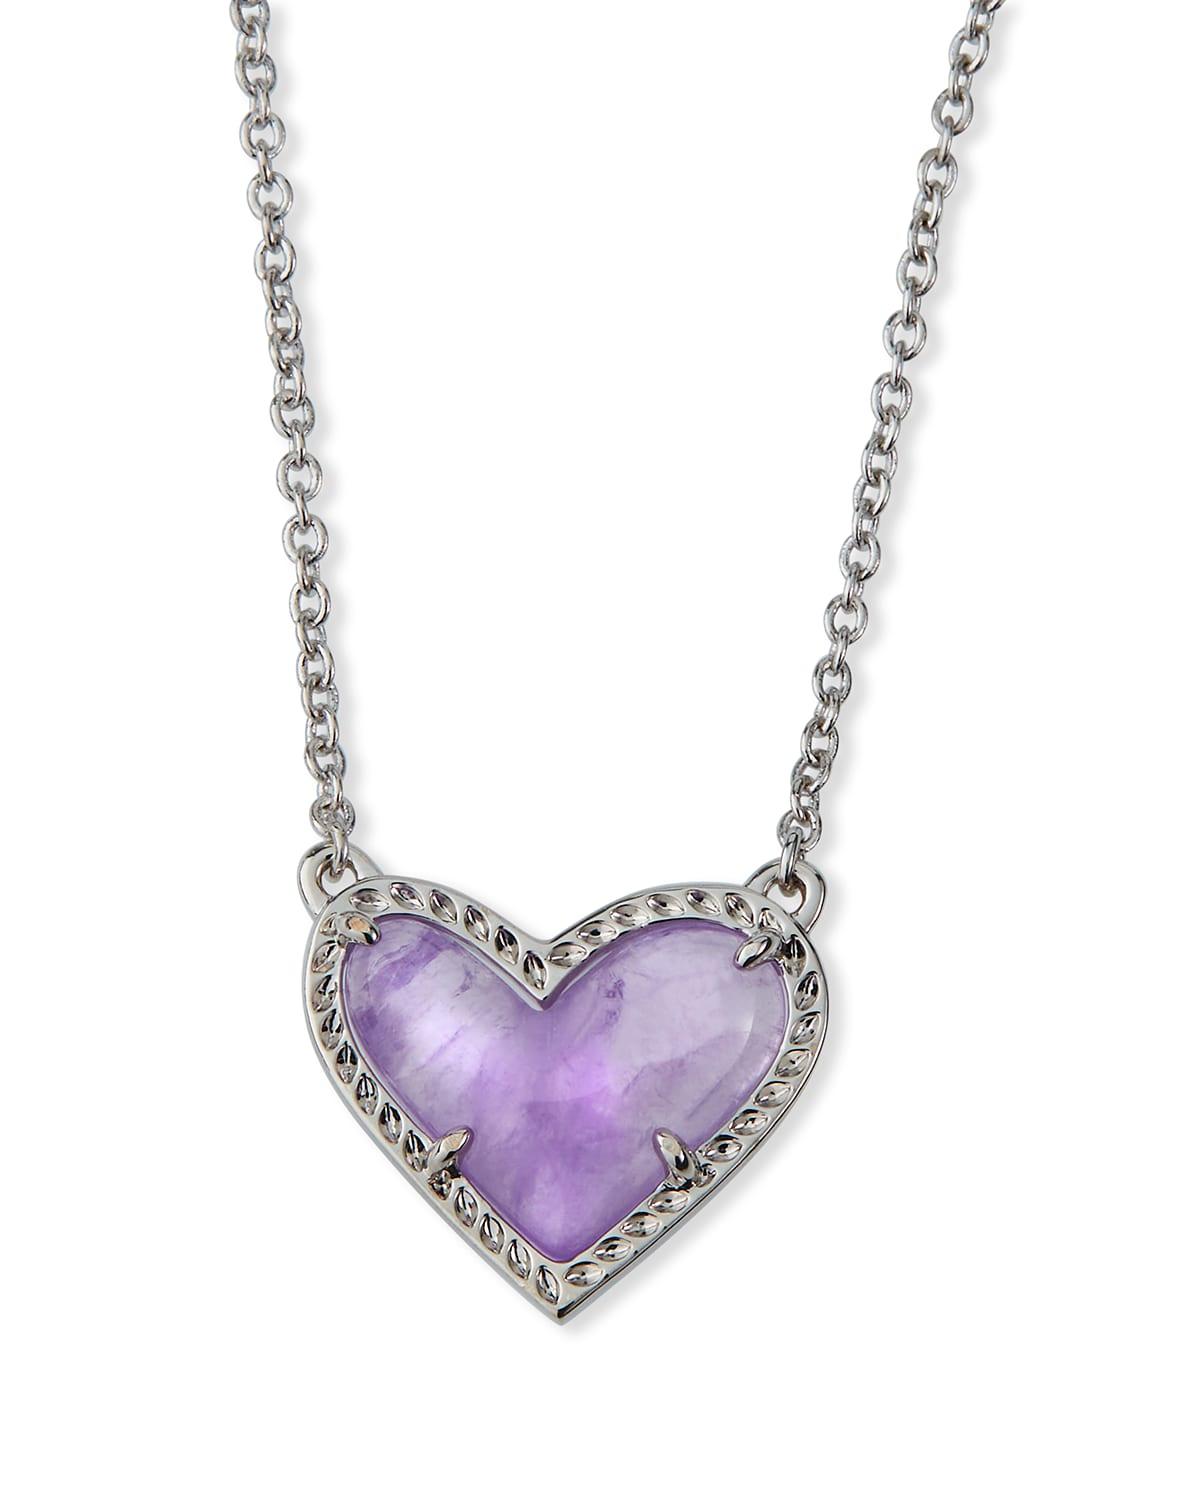 Framed Ari Heart Silver Short Pendant Necklace in Lilac Opalescent Resin